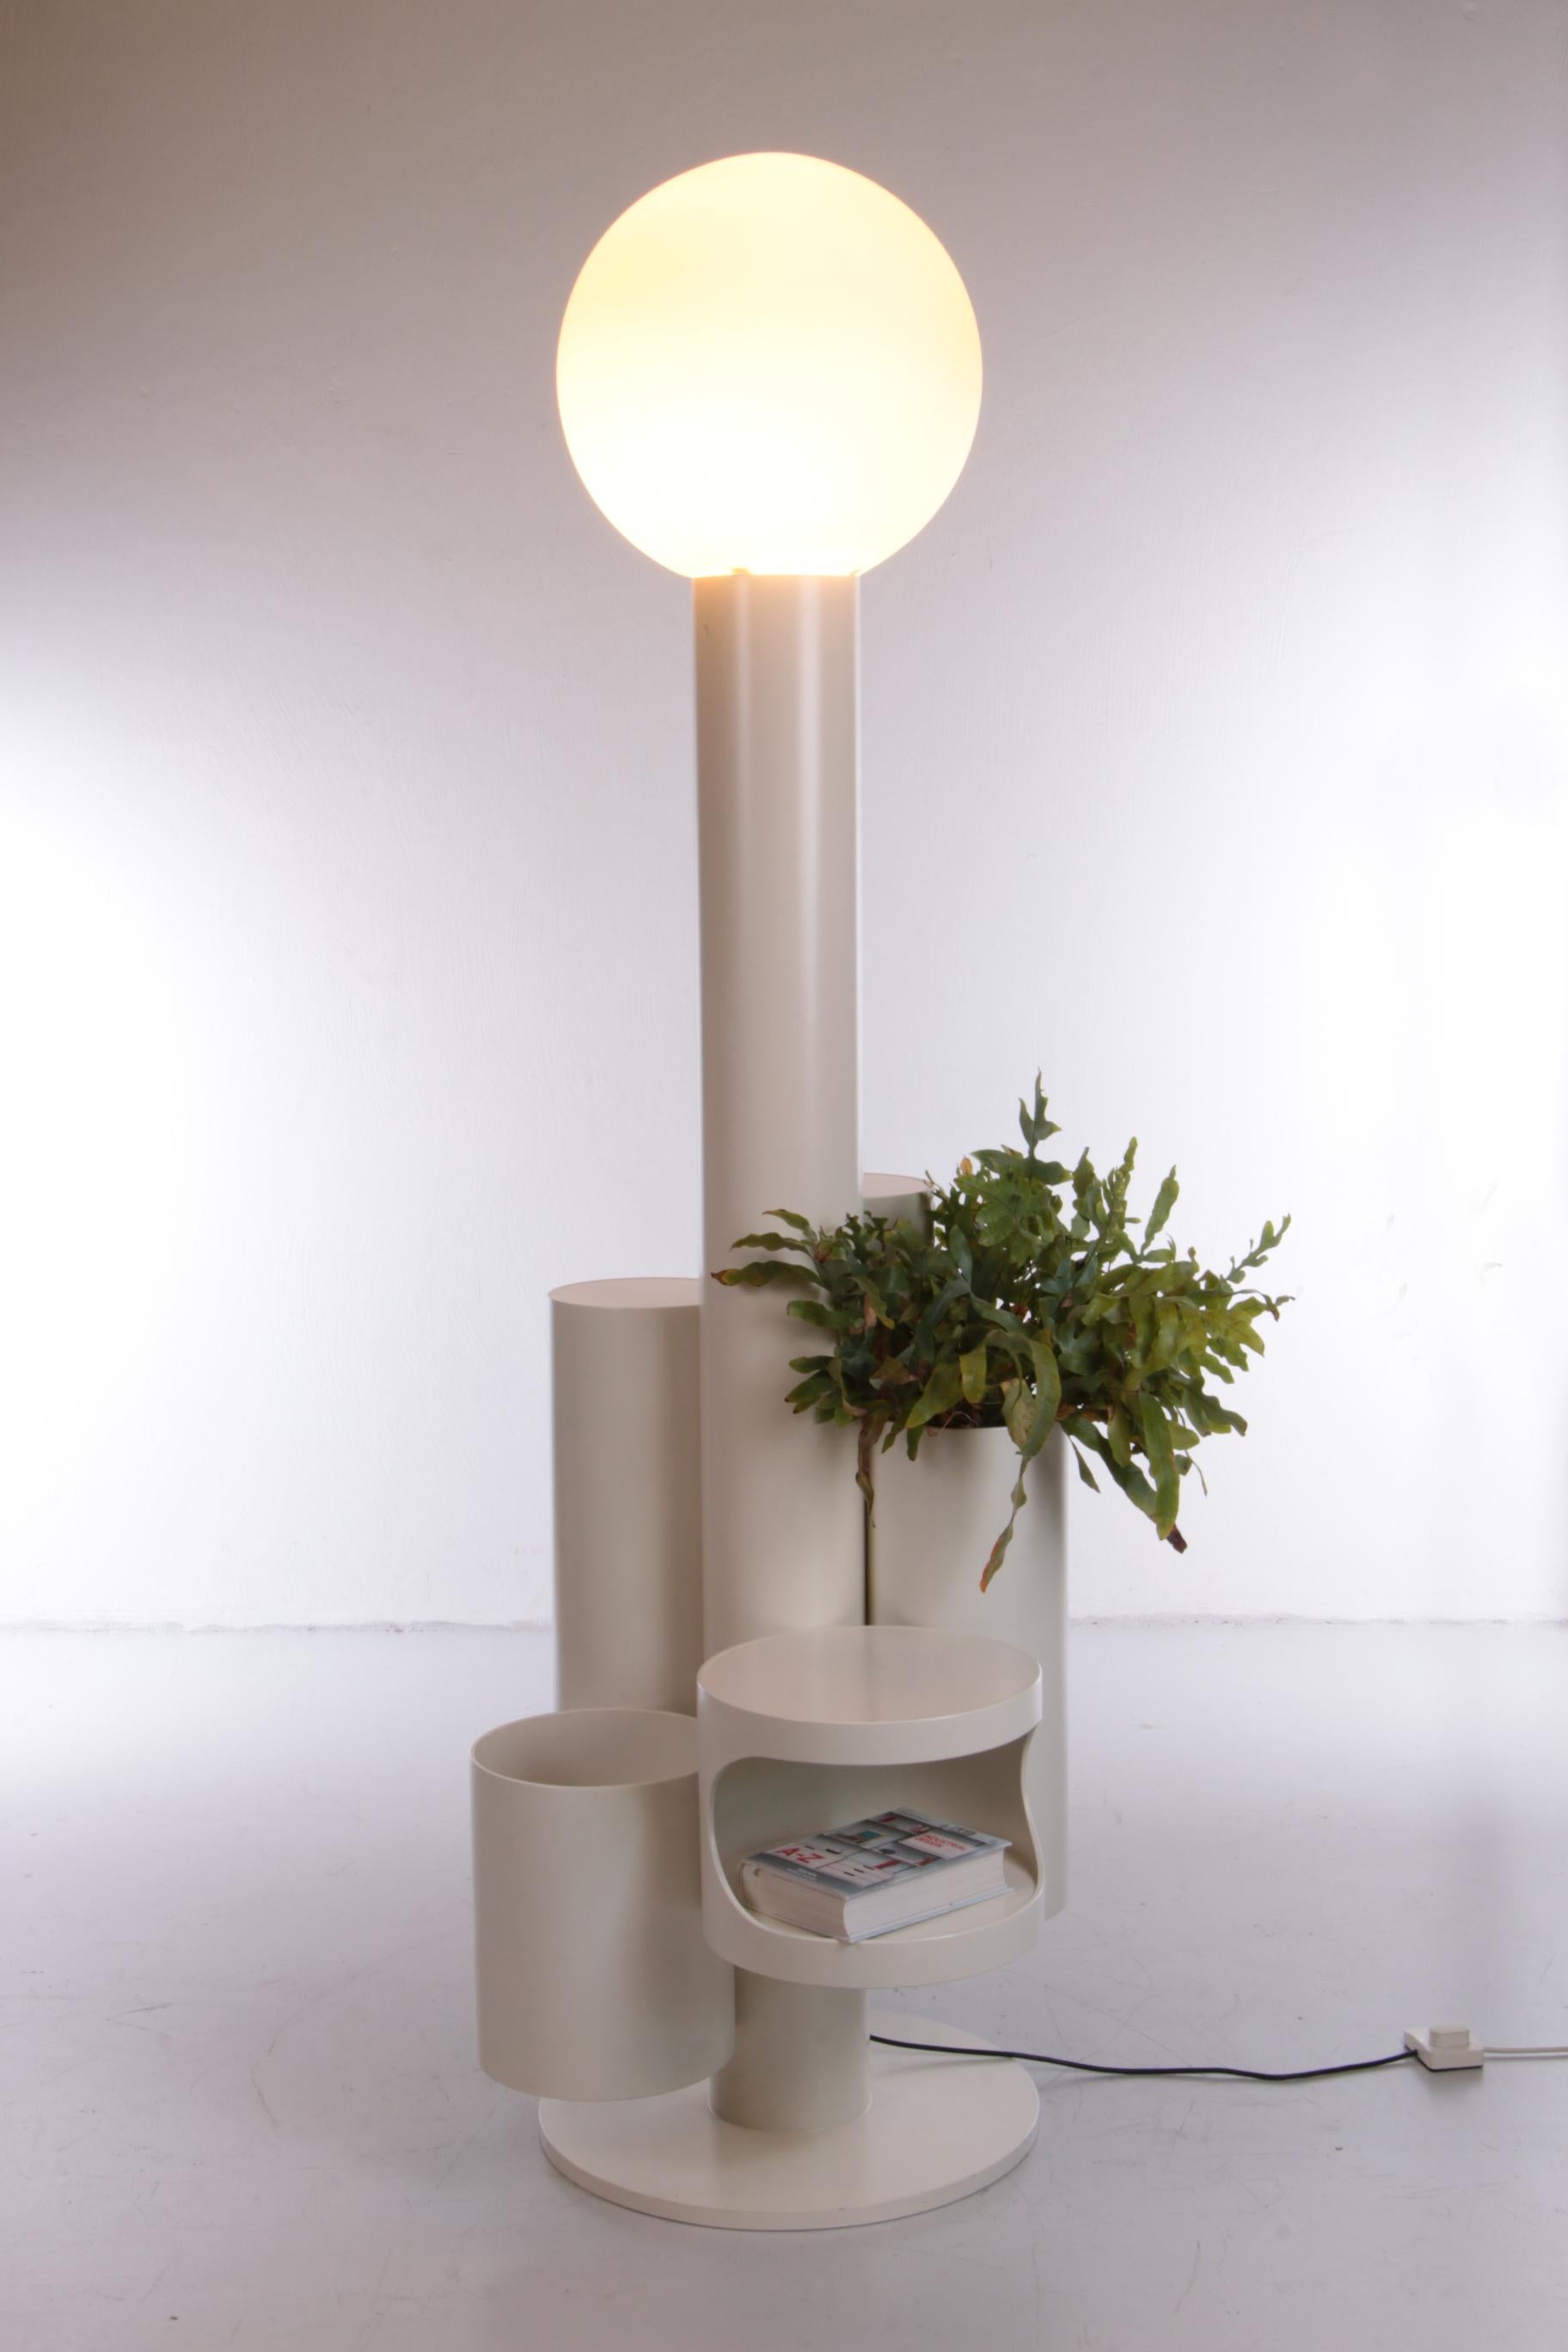 Close Encounter floor lamp and plant table for Kerst Koopman, Netherlands 1980

This cool Bergers collection 'Close encounter' floor lamp is a true miracle. The lamp was made for the Dutch brand Kerst Koopman.

The staggered cylindrical shapes